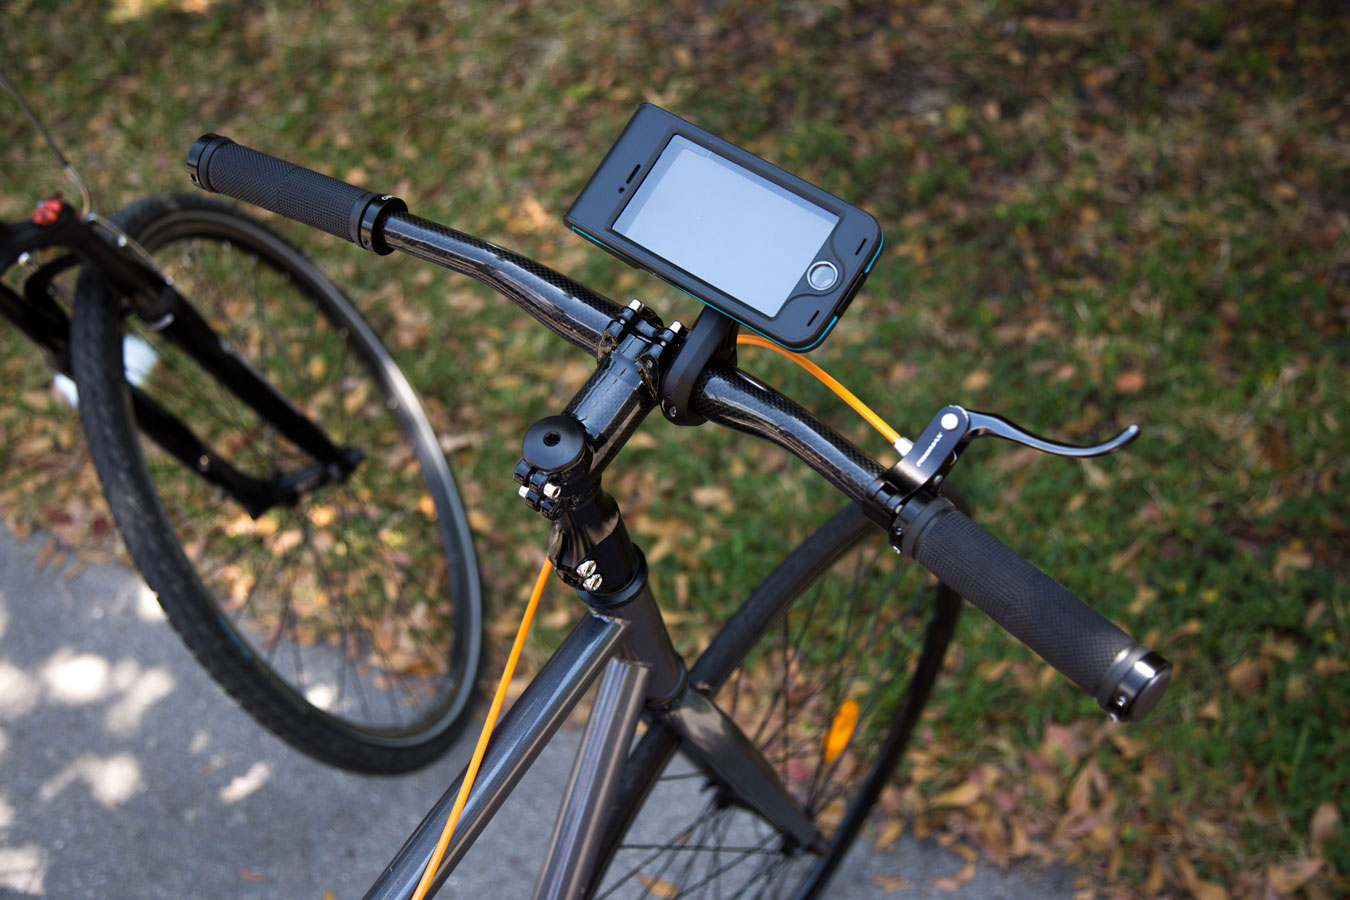 bycle case and app turns iphone into bike computer for tracking rides mount 9